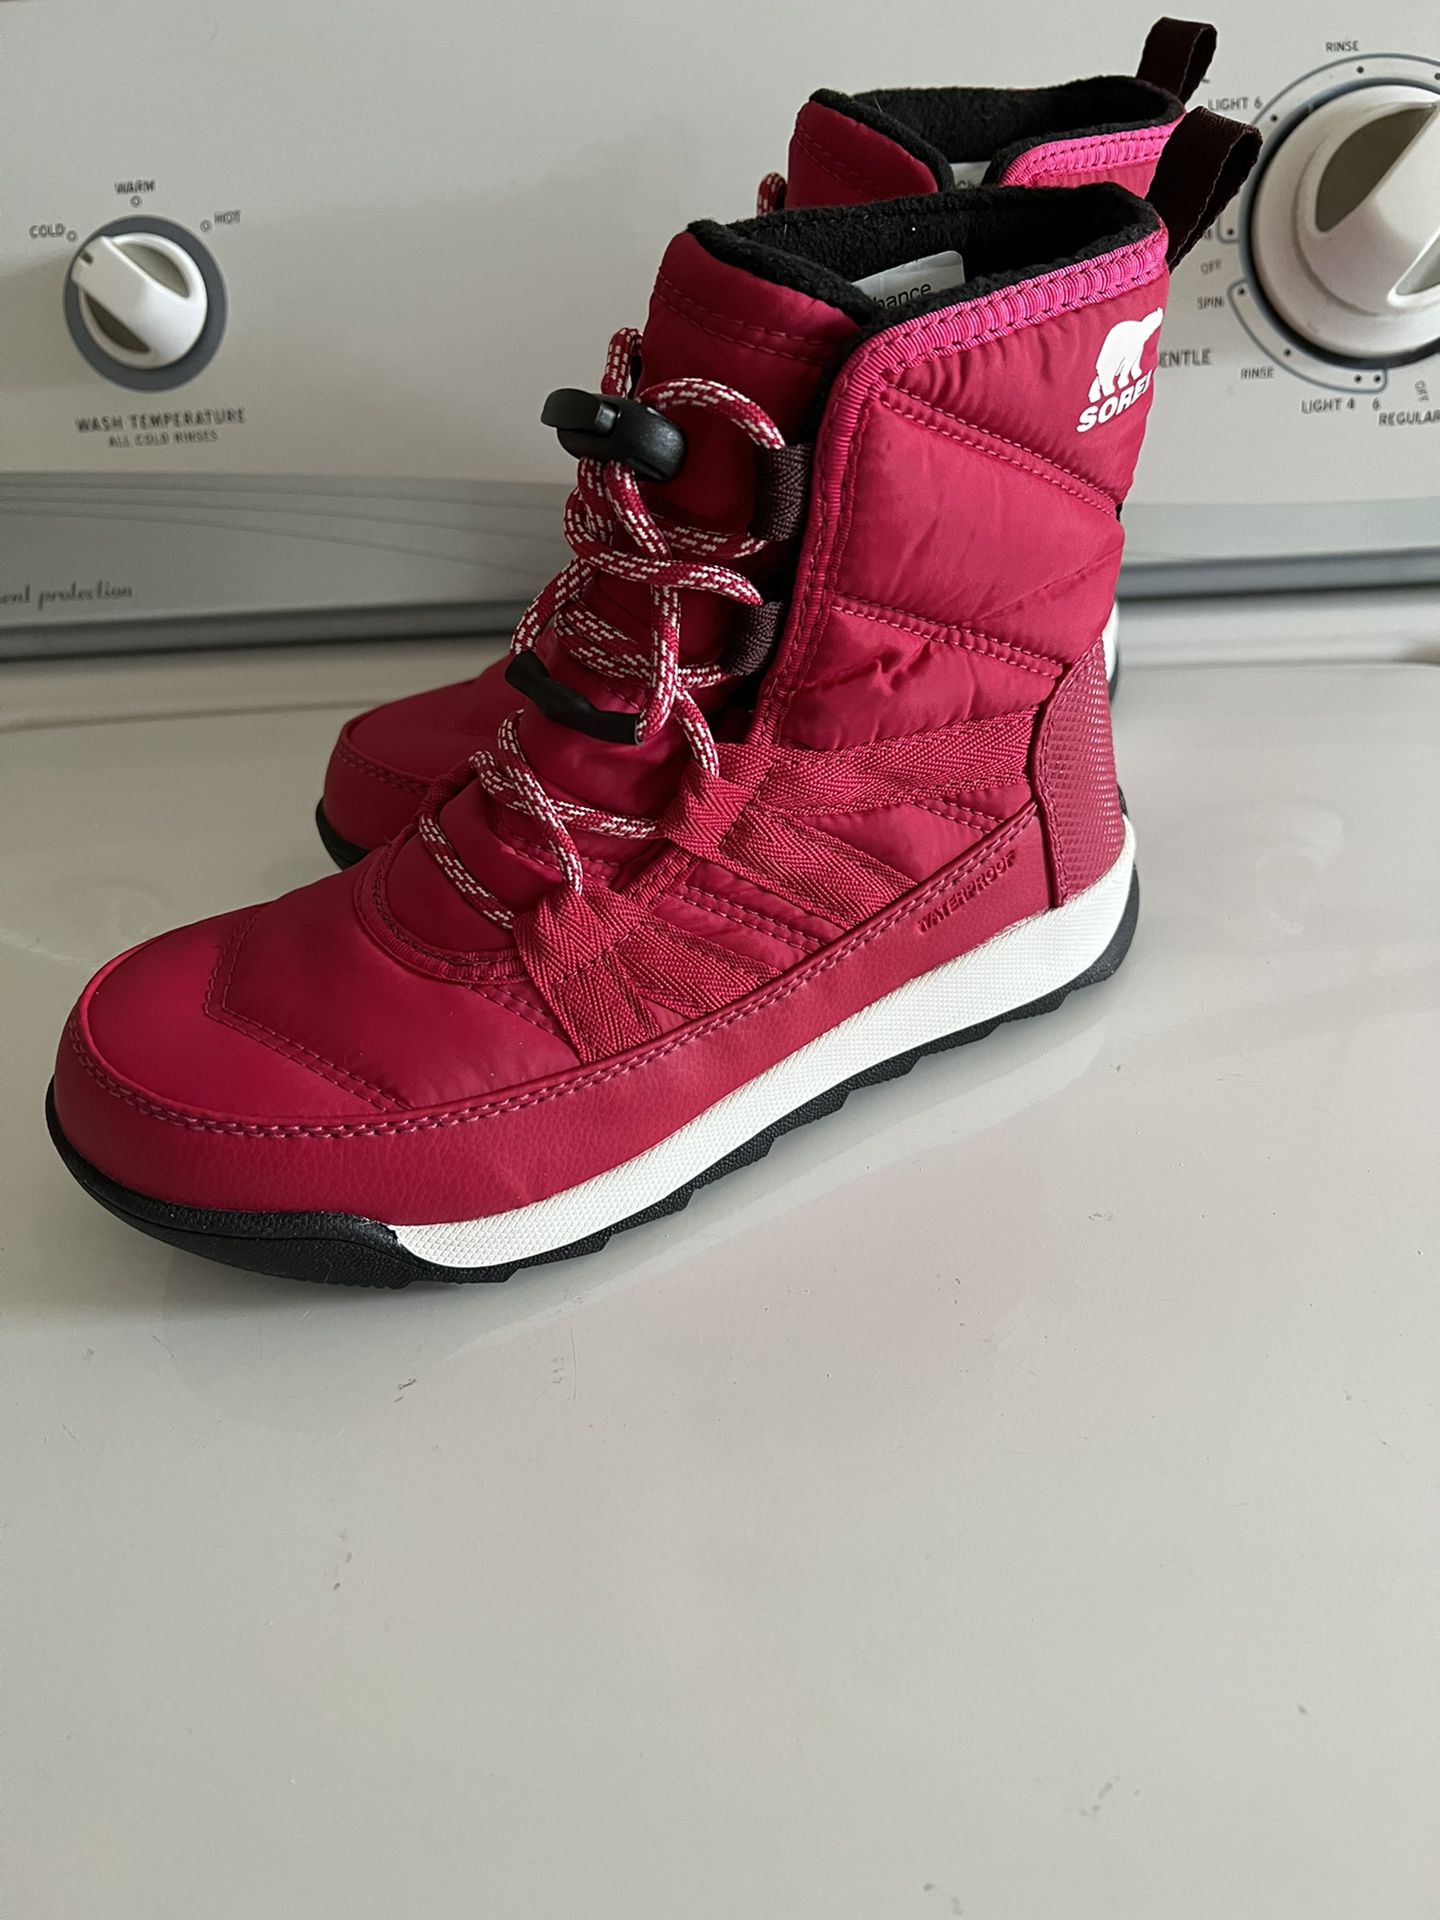 Brand New Sorel Boots Size 7.5